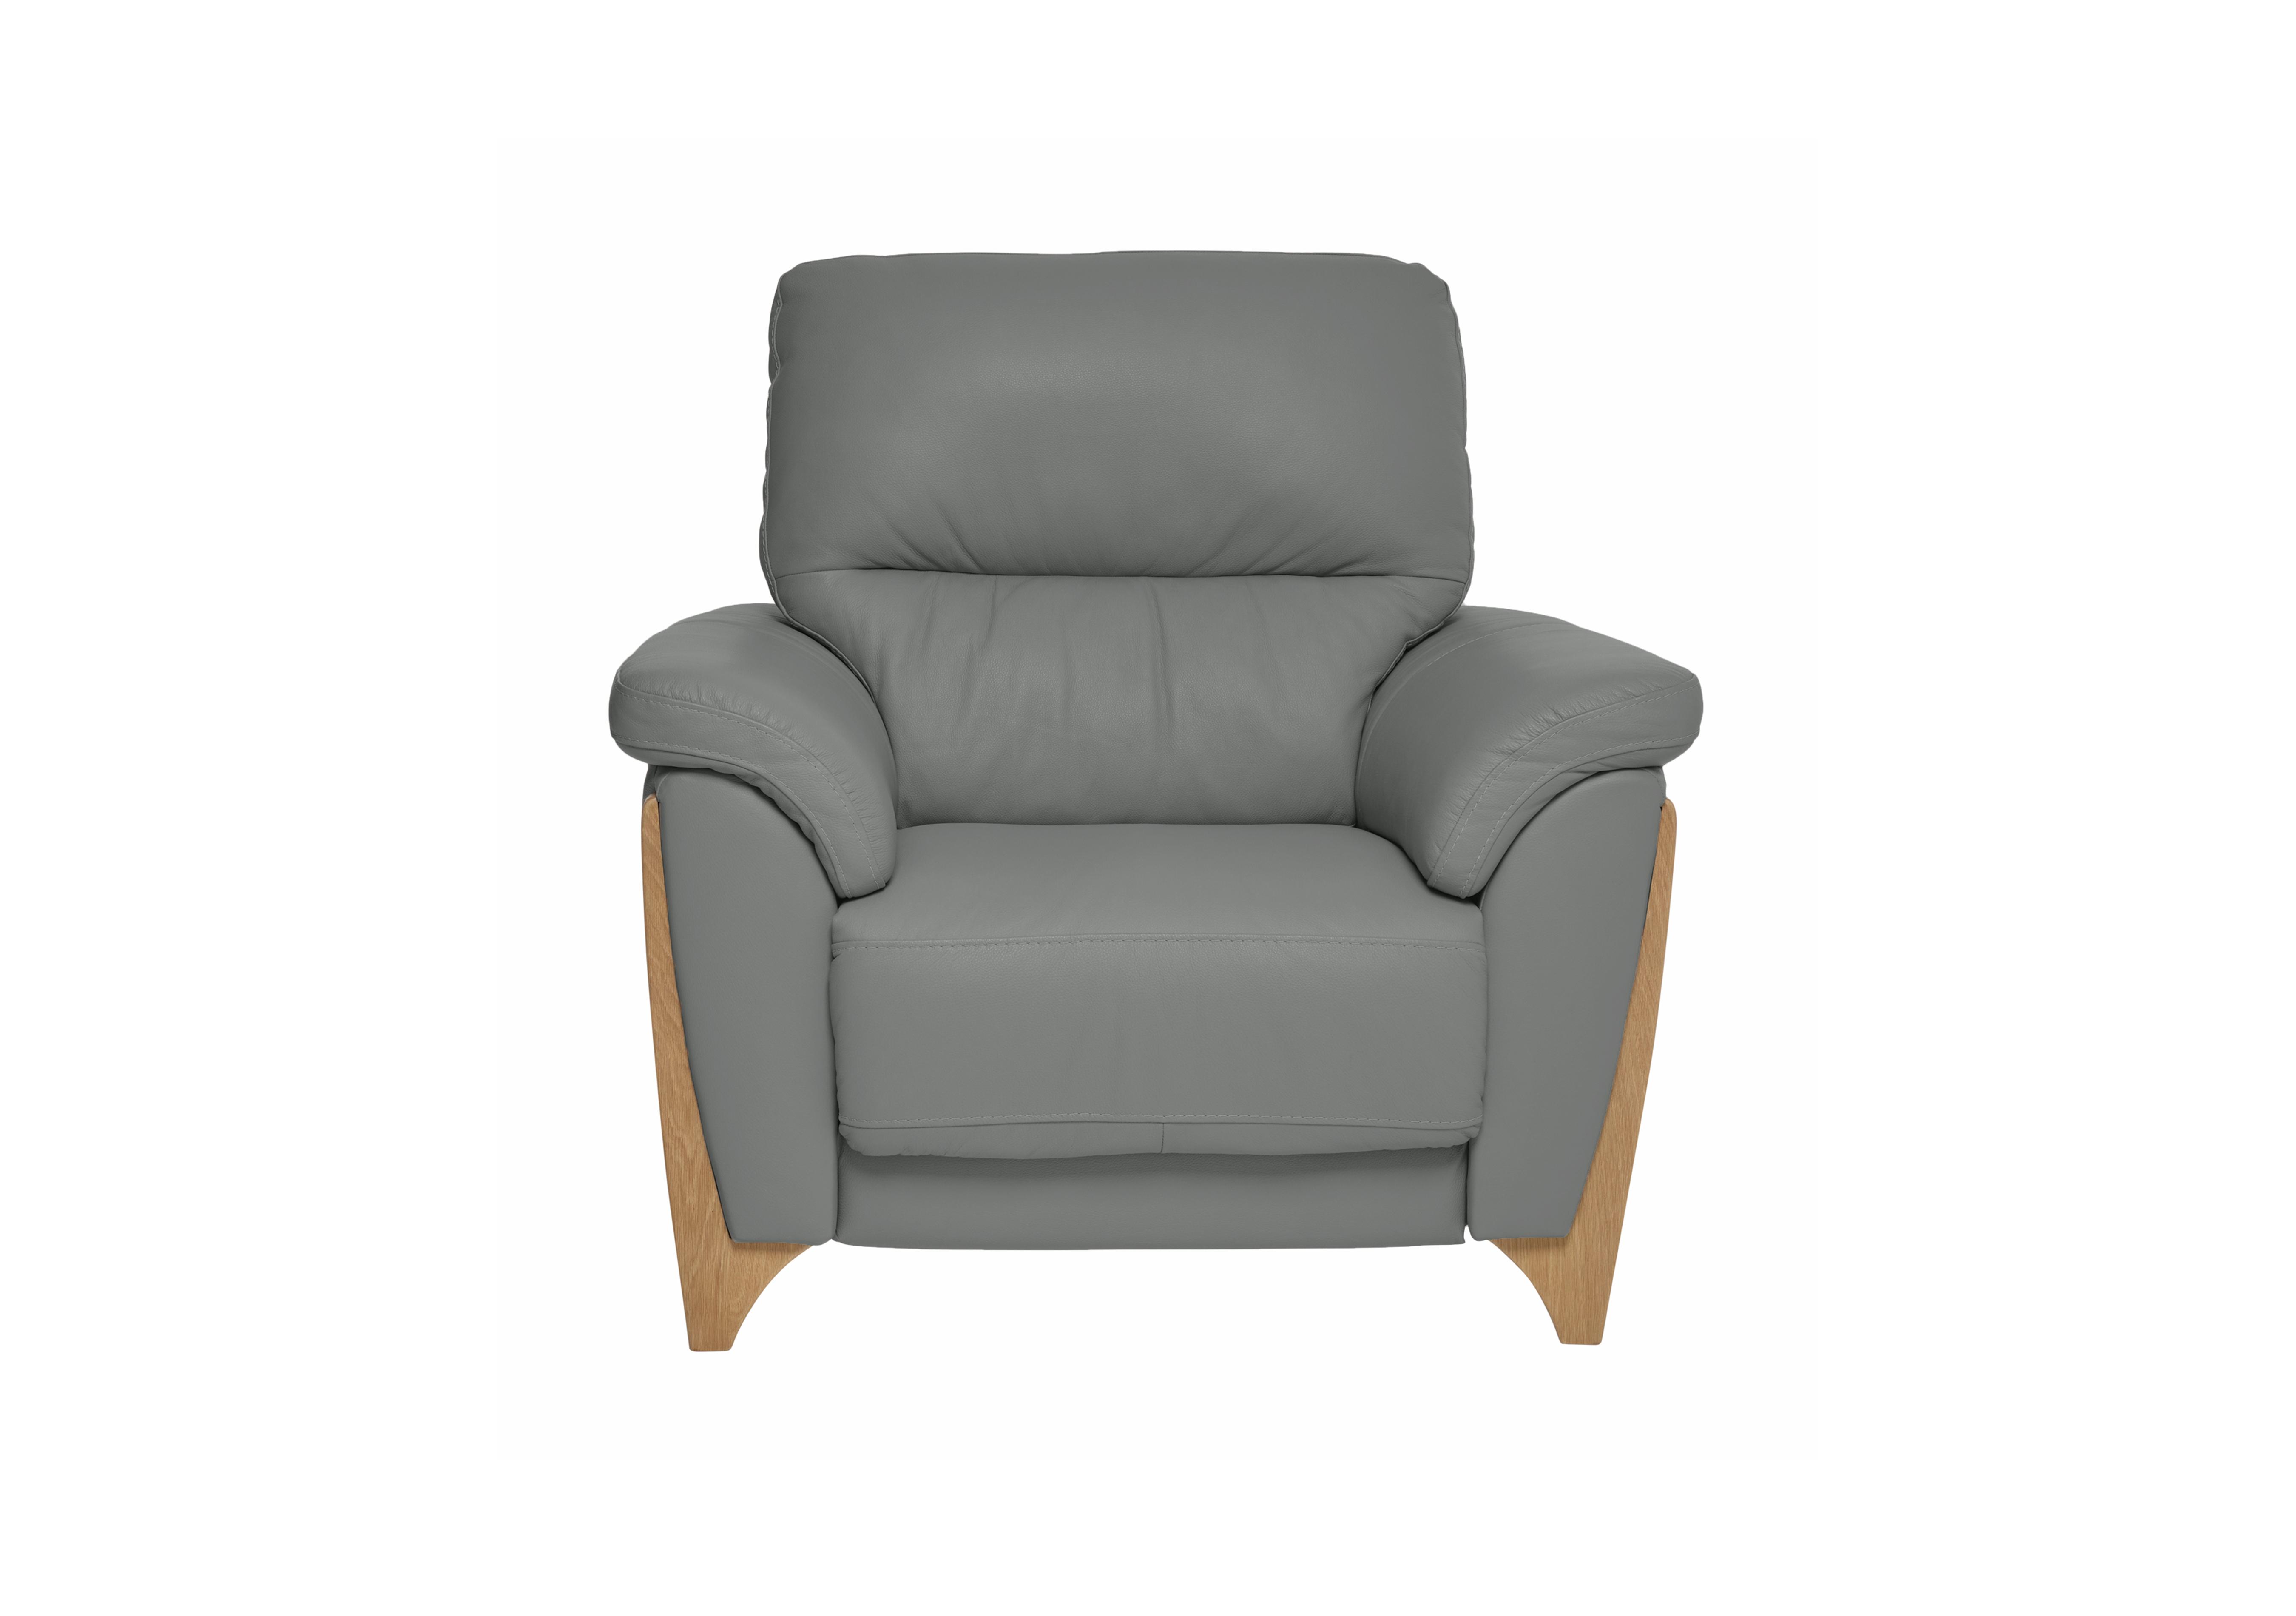 Enna Leather Armchair in L956 on Furniture Village